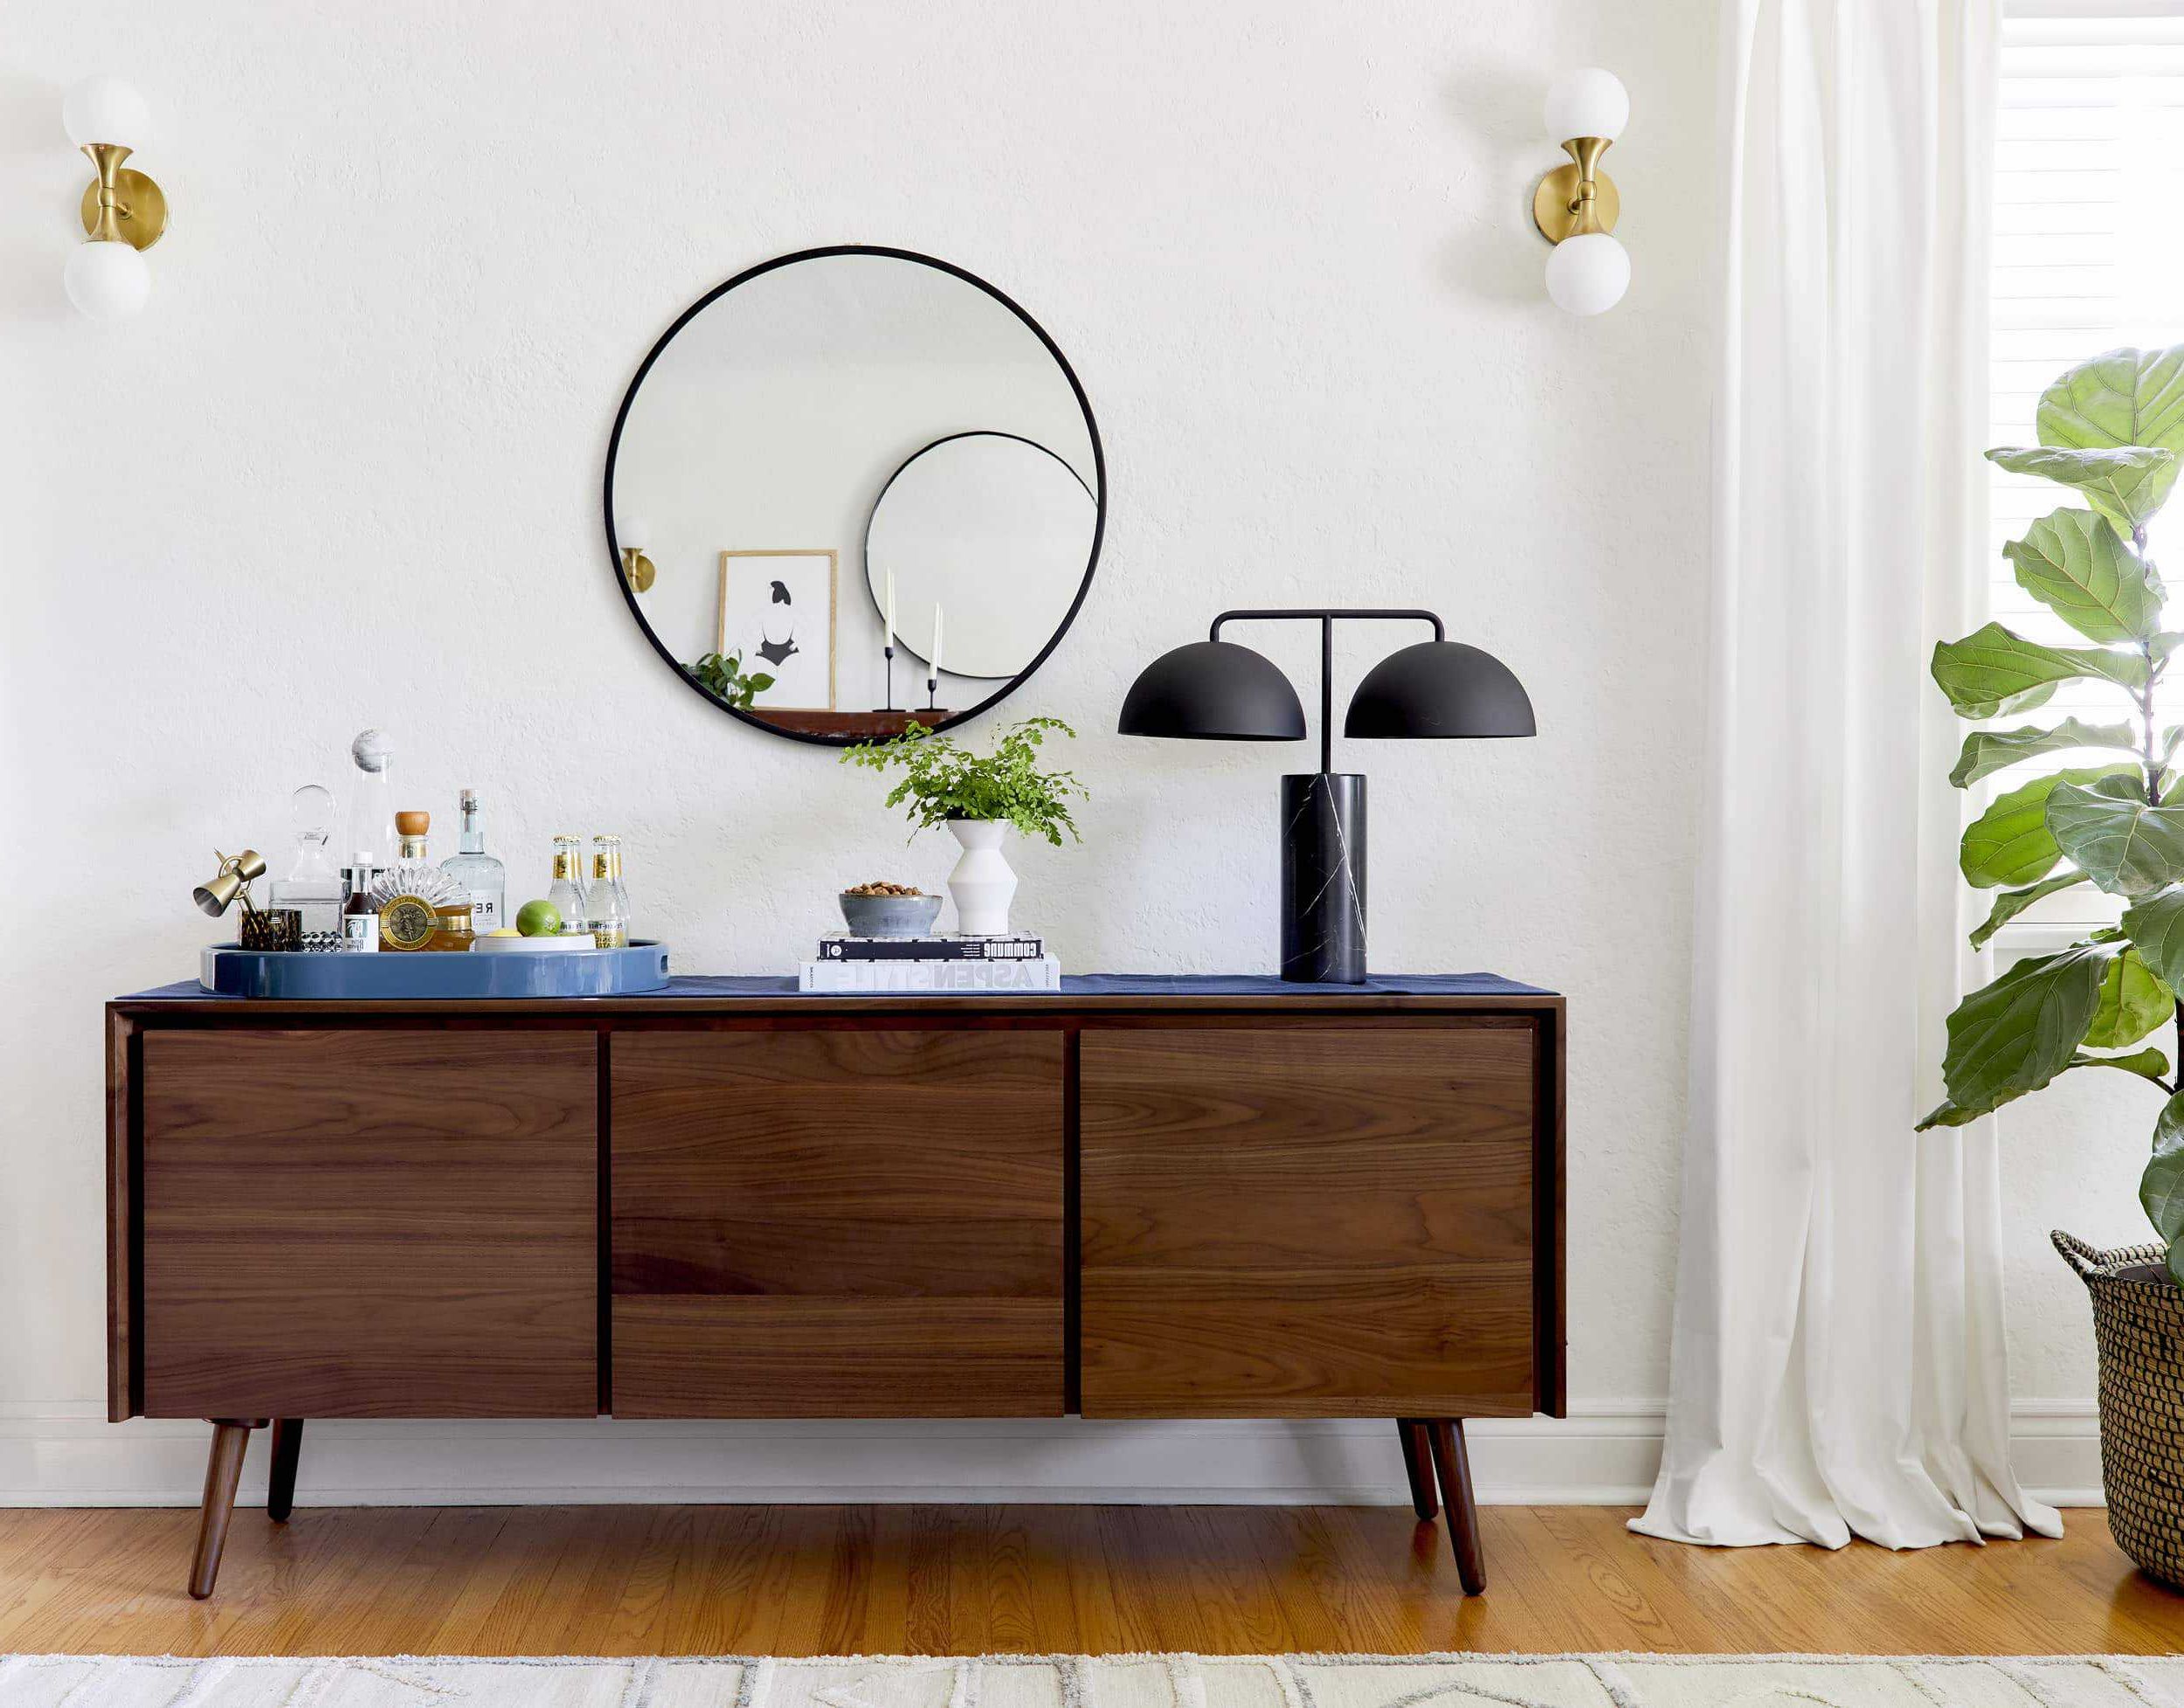 Credenzas For Living Room Pertaining To 2017 4 Ways To Style That Credenza For "real Life" + Shop Our Favorite Credenzas  – Emily Henderson (Photo 9 of 10)